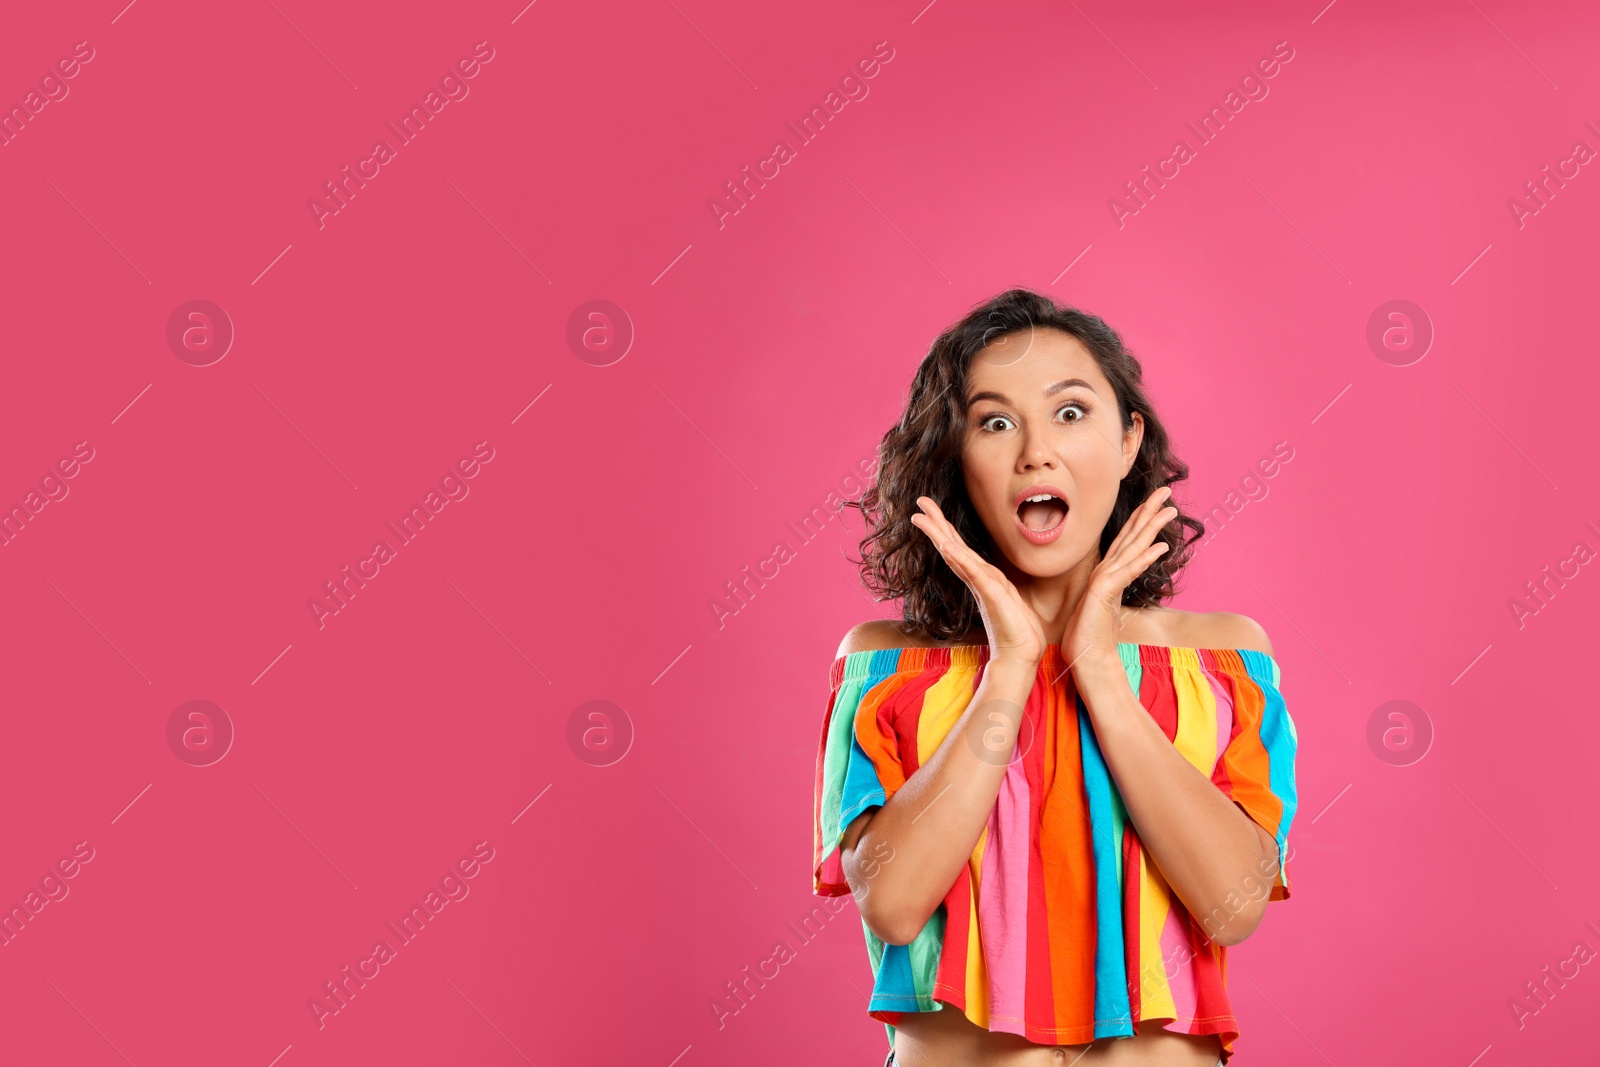 Photo of Surprised young woman in casual outfit on pink background. Space for text